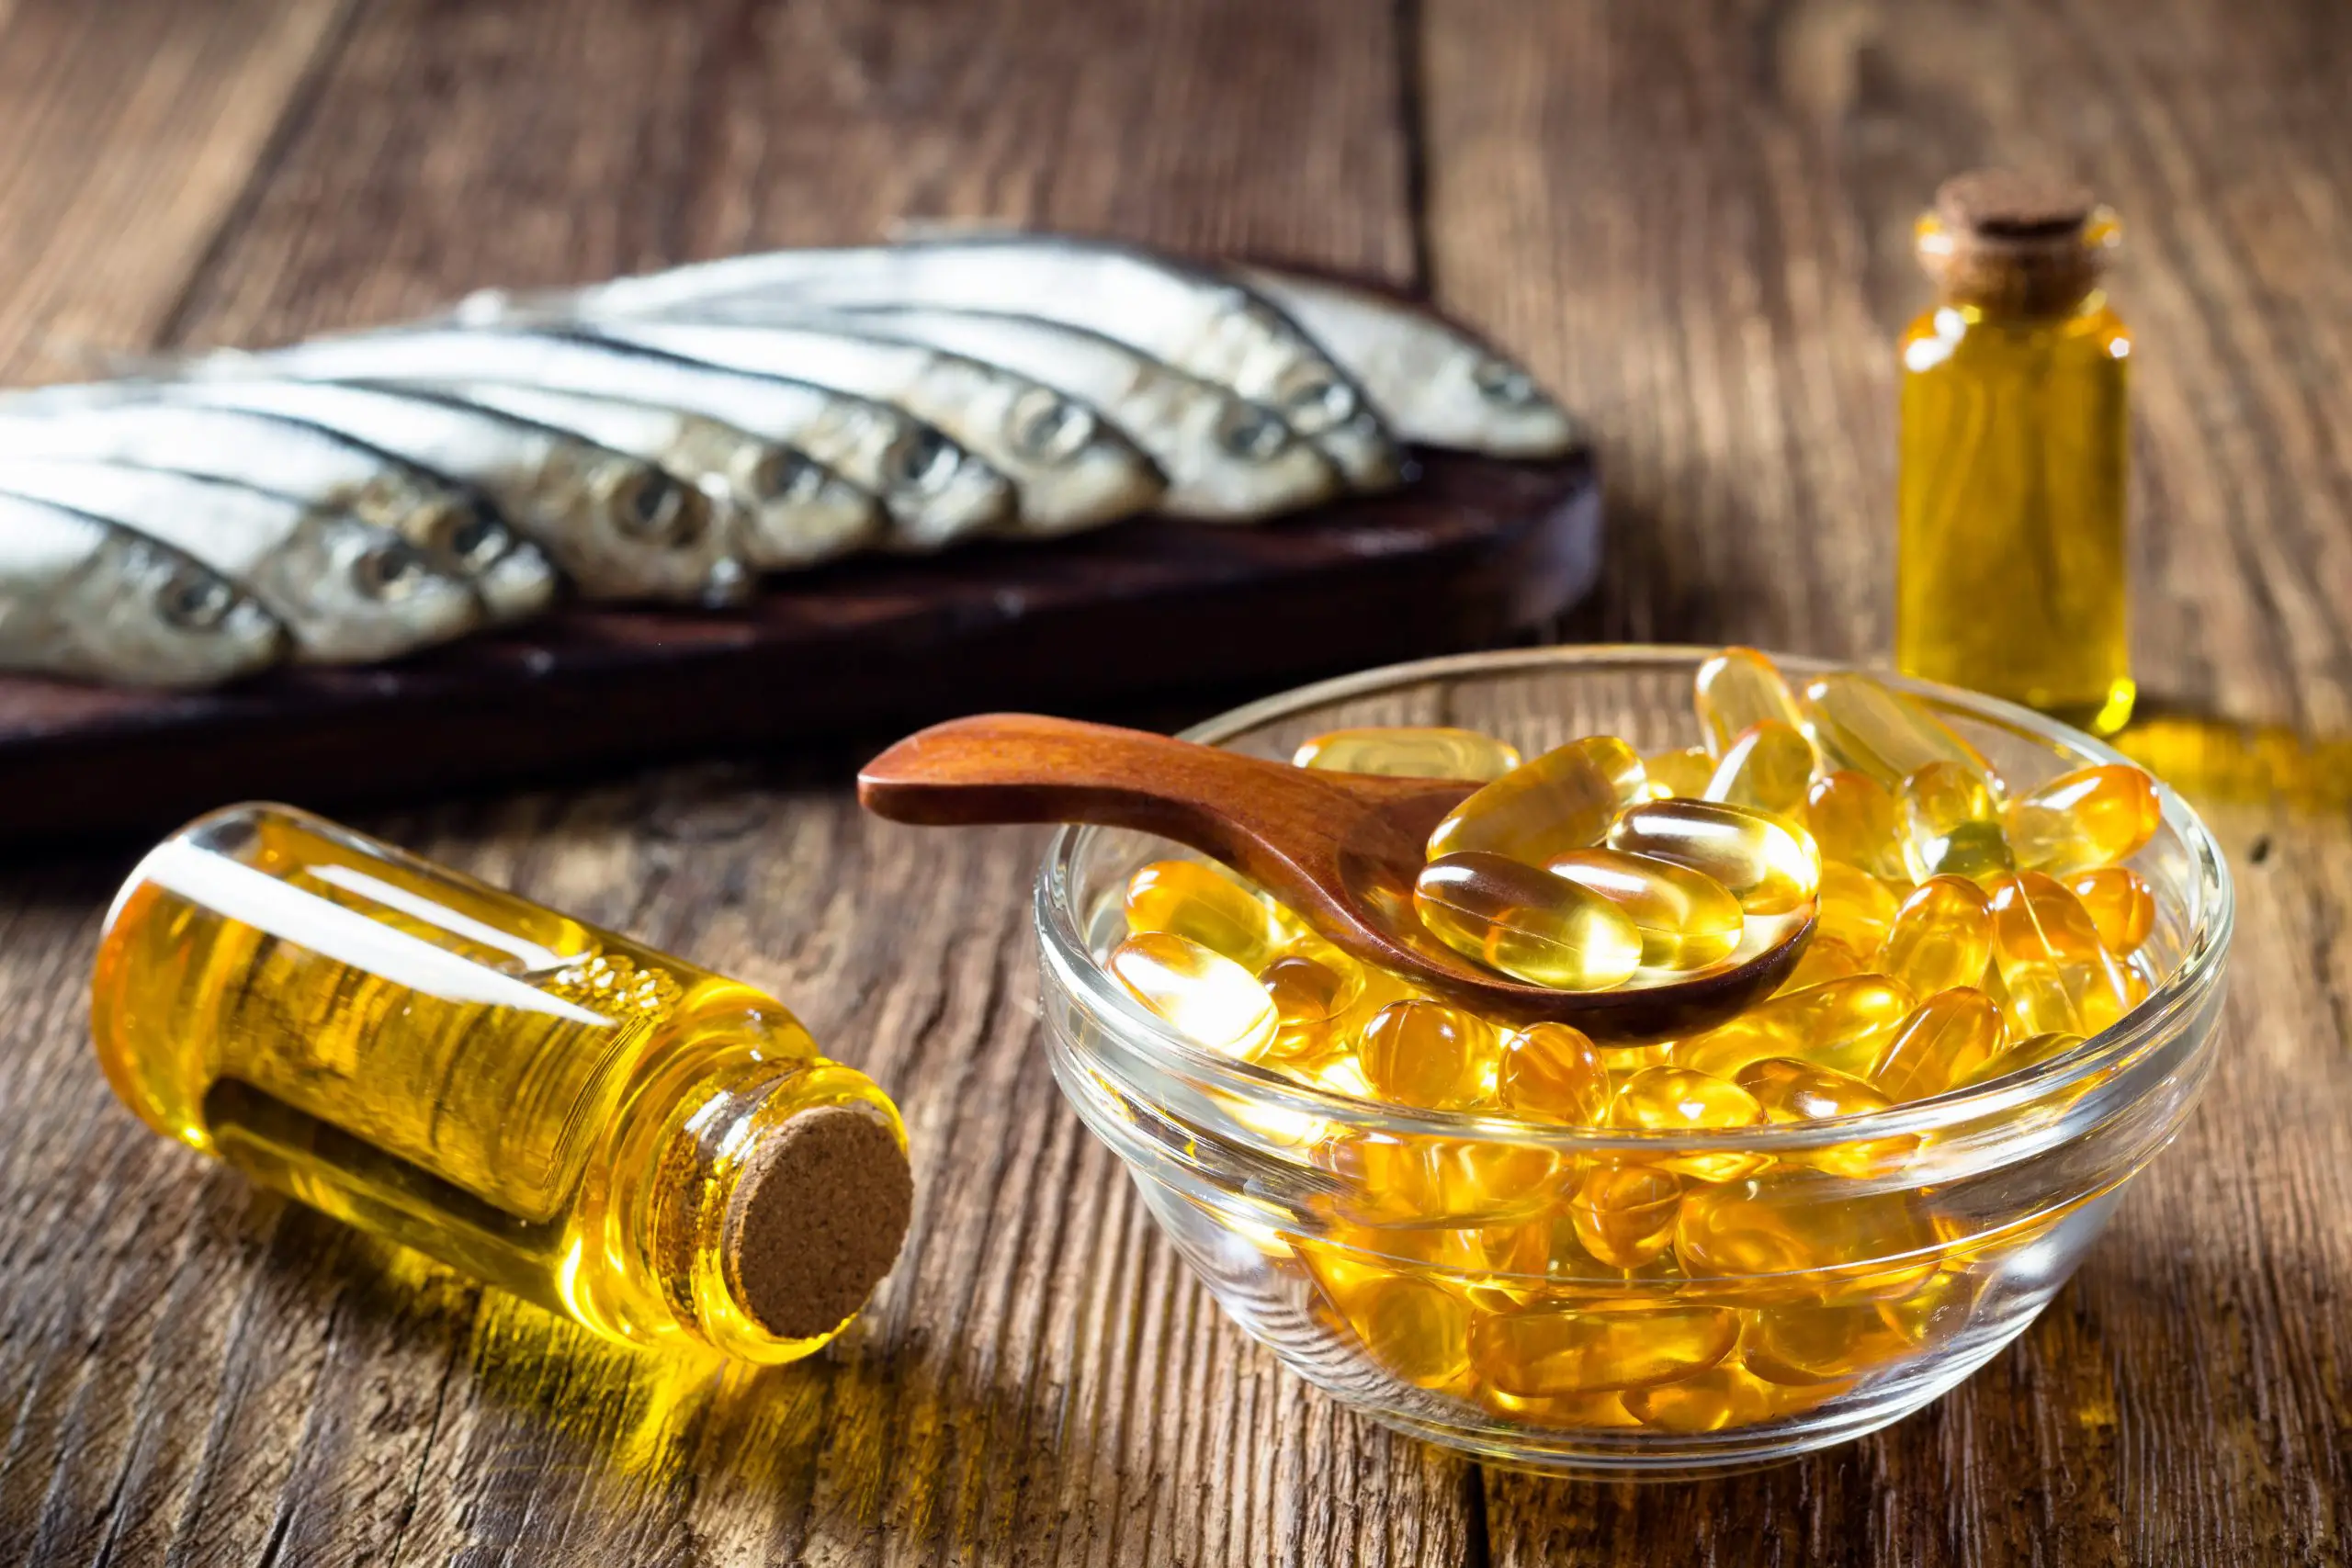 Ranking the best Vitamin D supplements of 2020